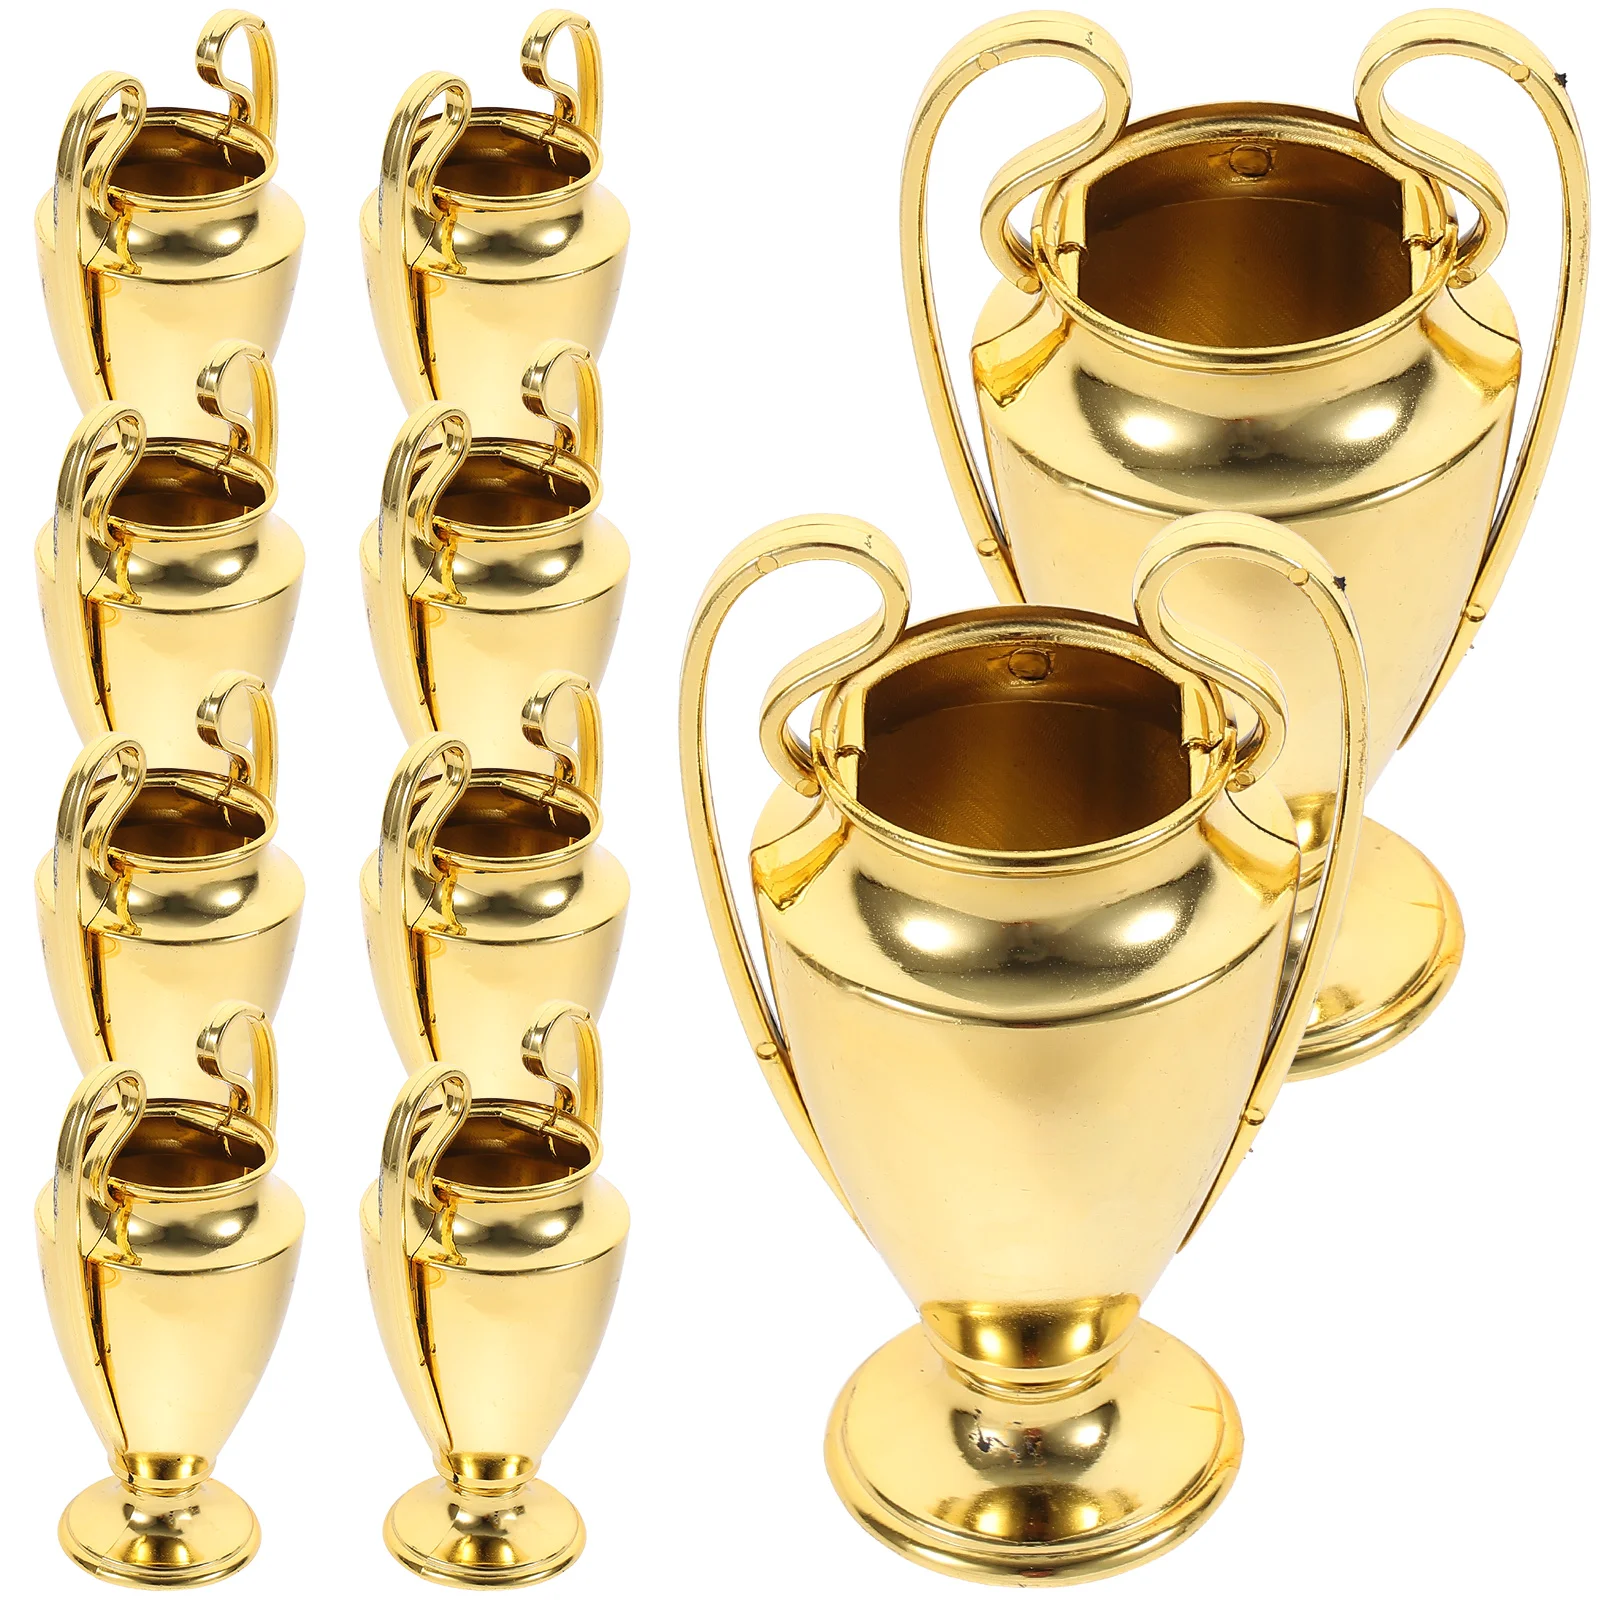 

10 Pcs Delicate Prize Trophy Plastic Trophies Exquisite Sports Accessories Small Fashion Compact Award